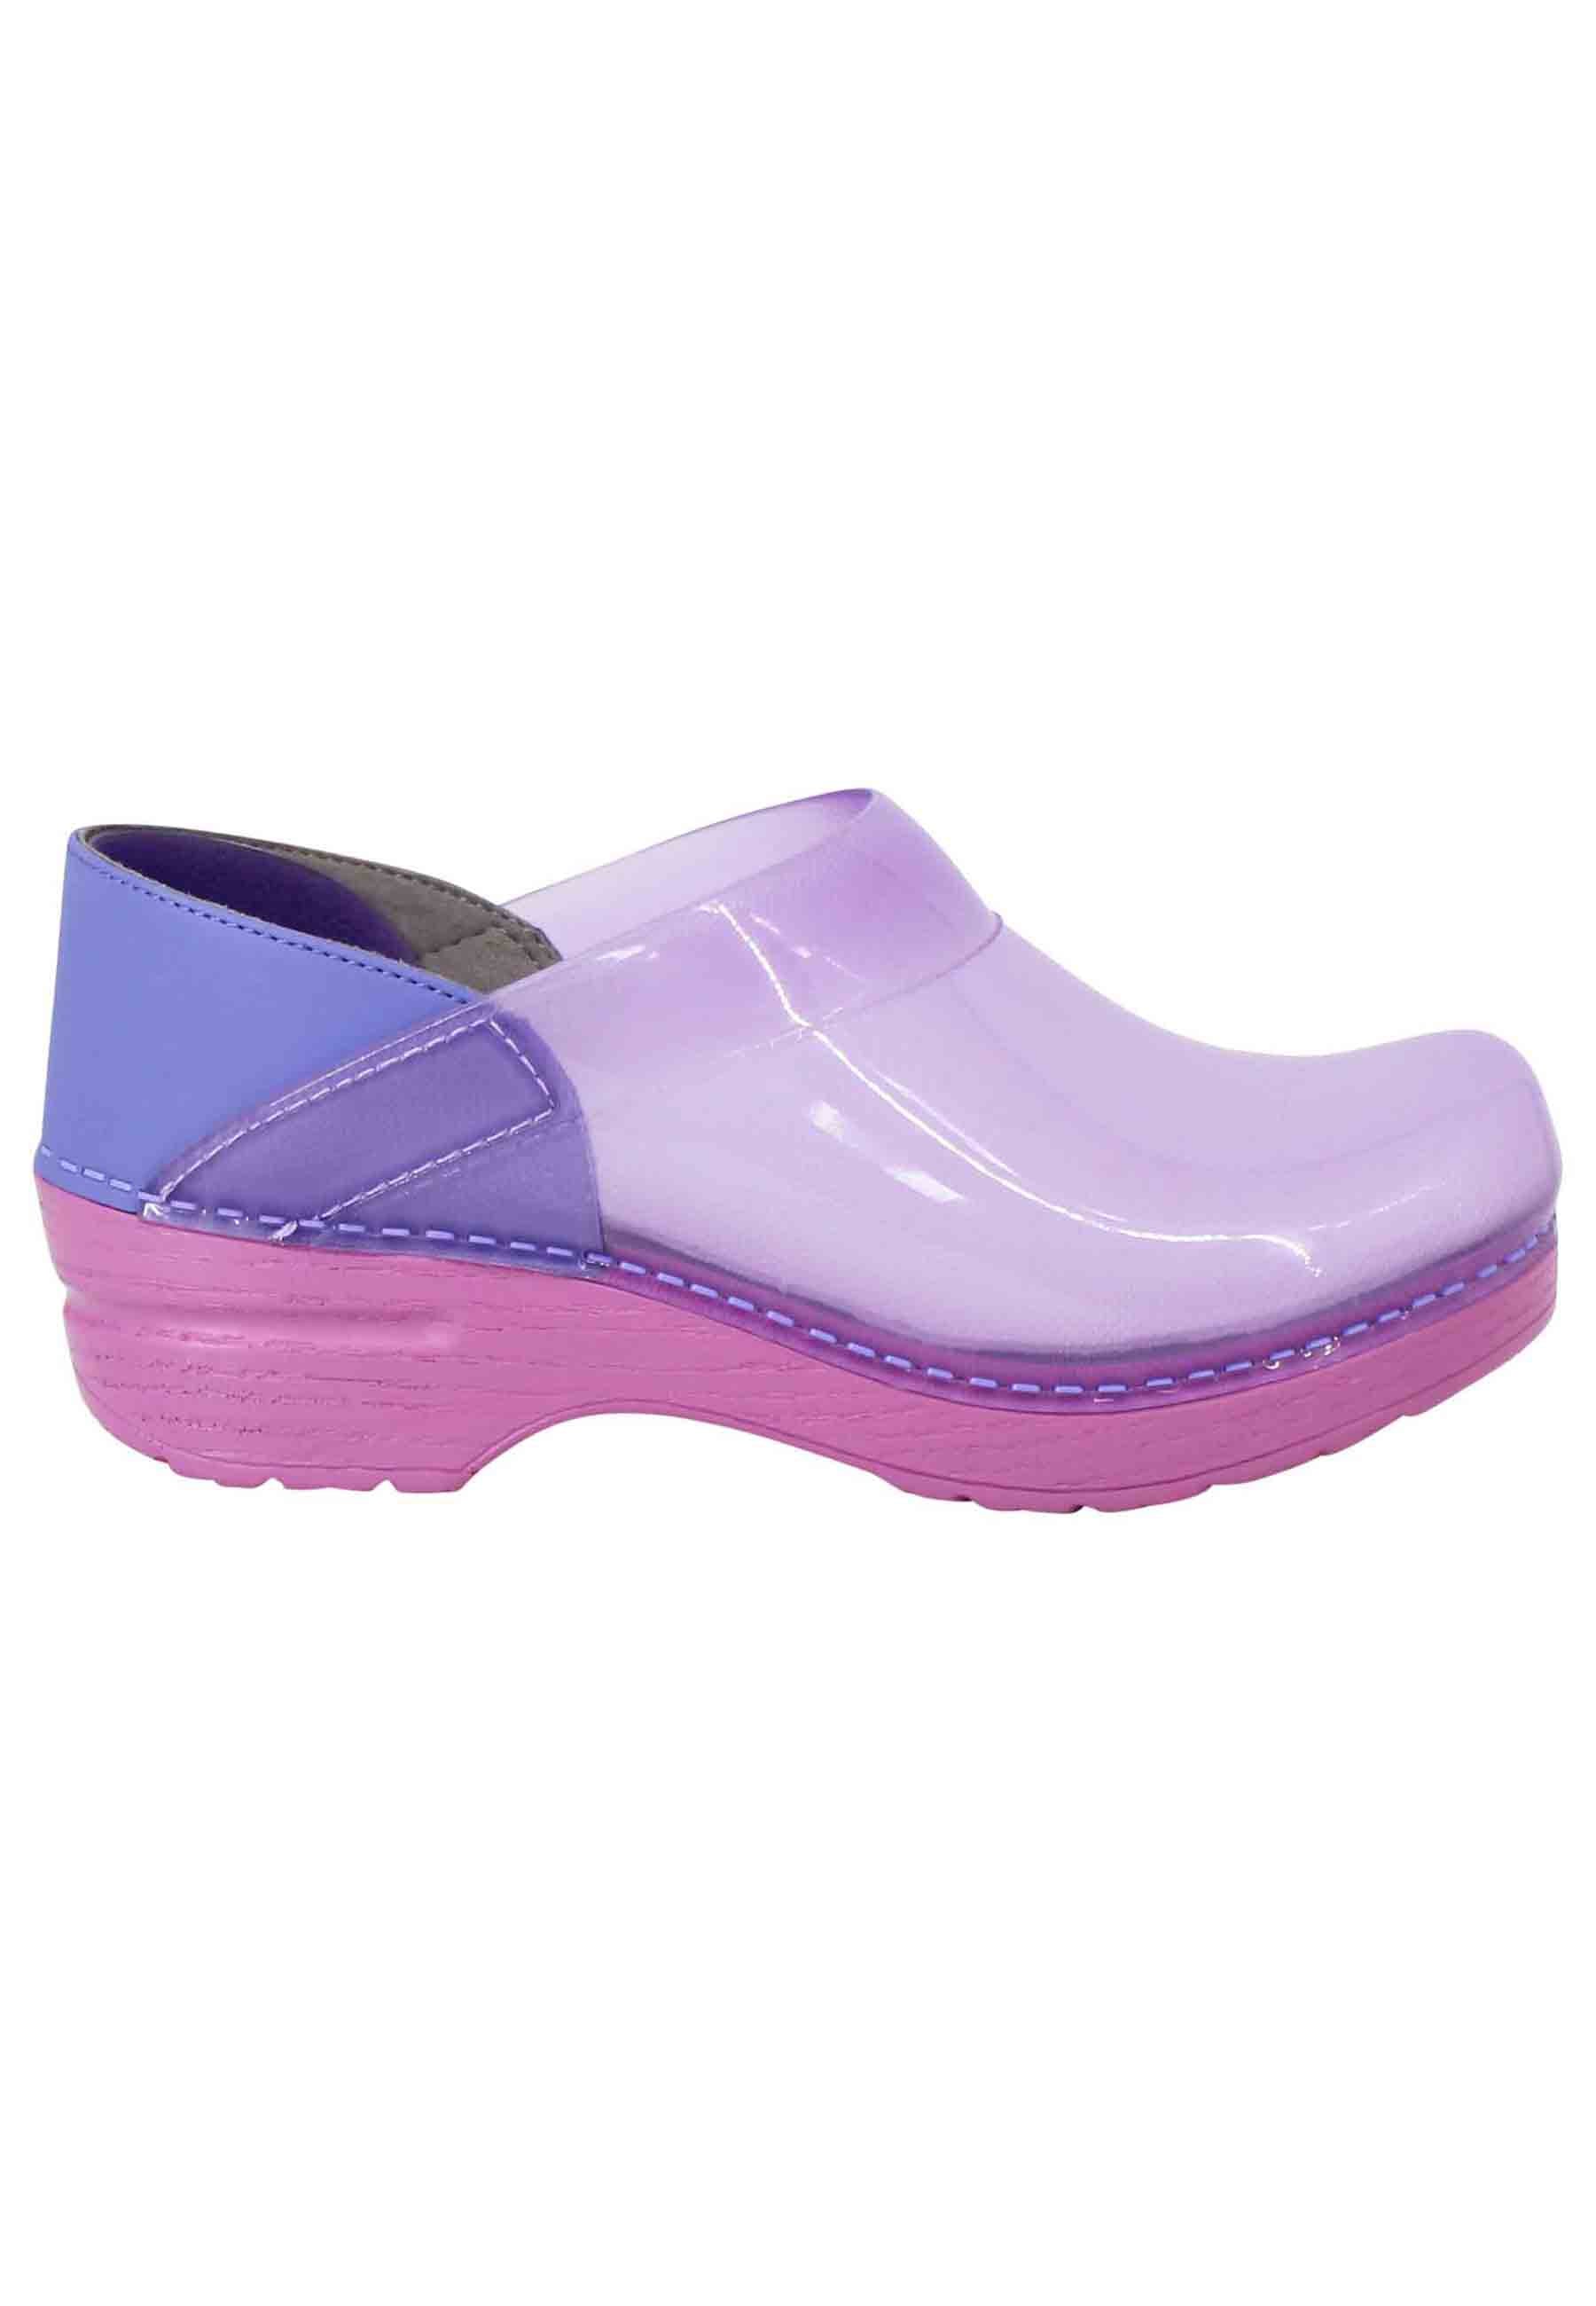 Women's clogs in purple plexy with lilac leather